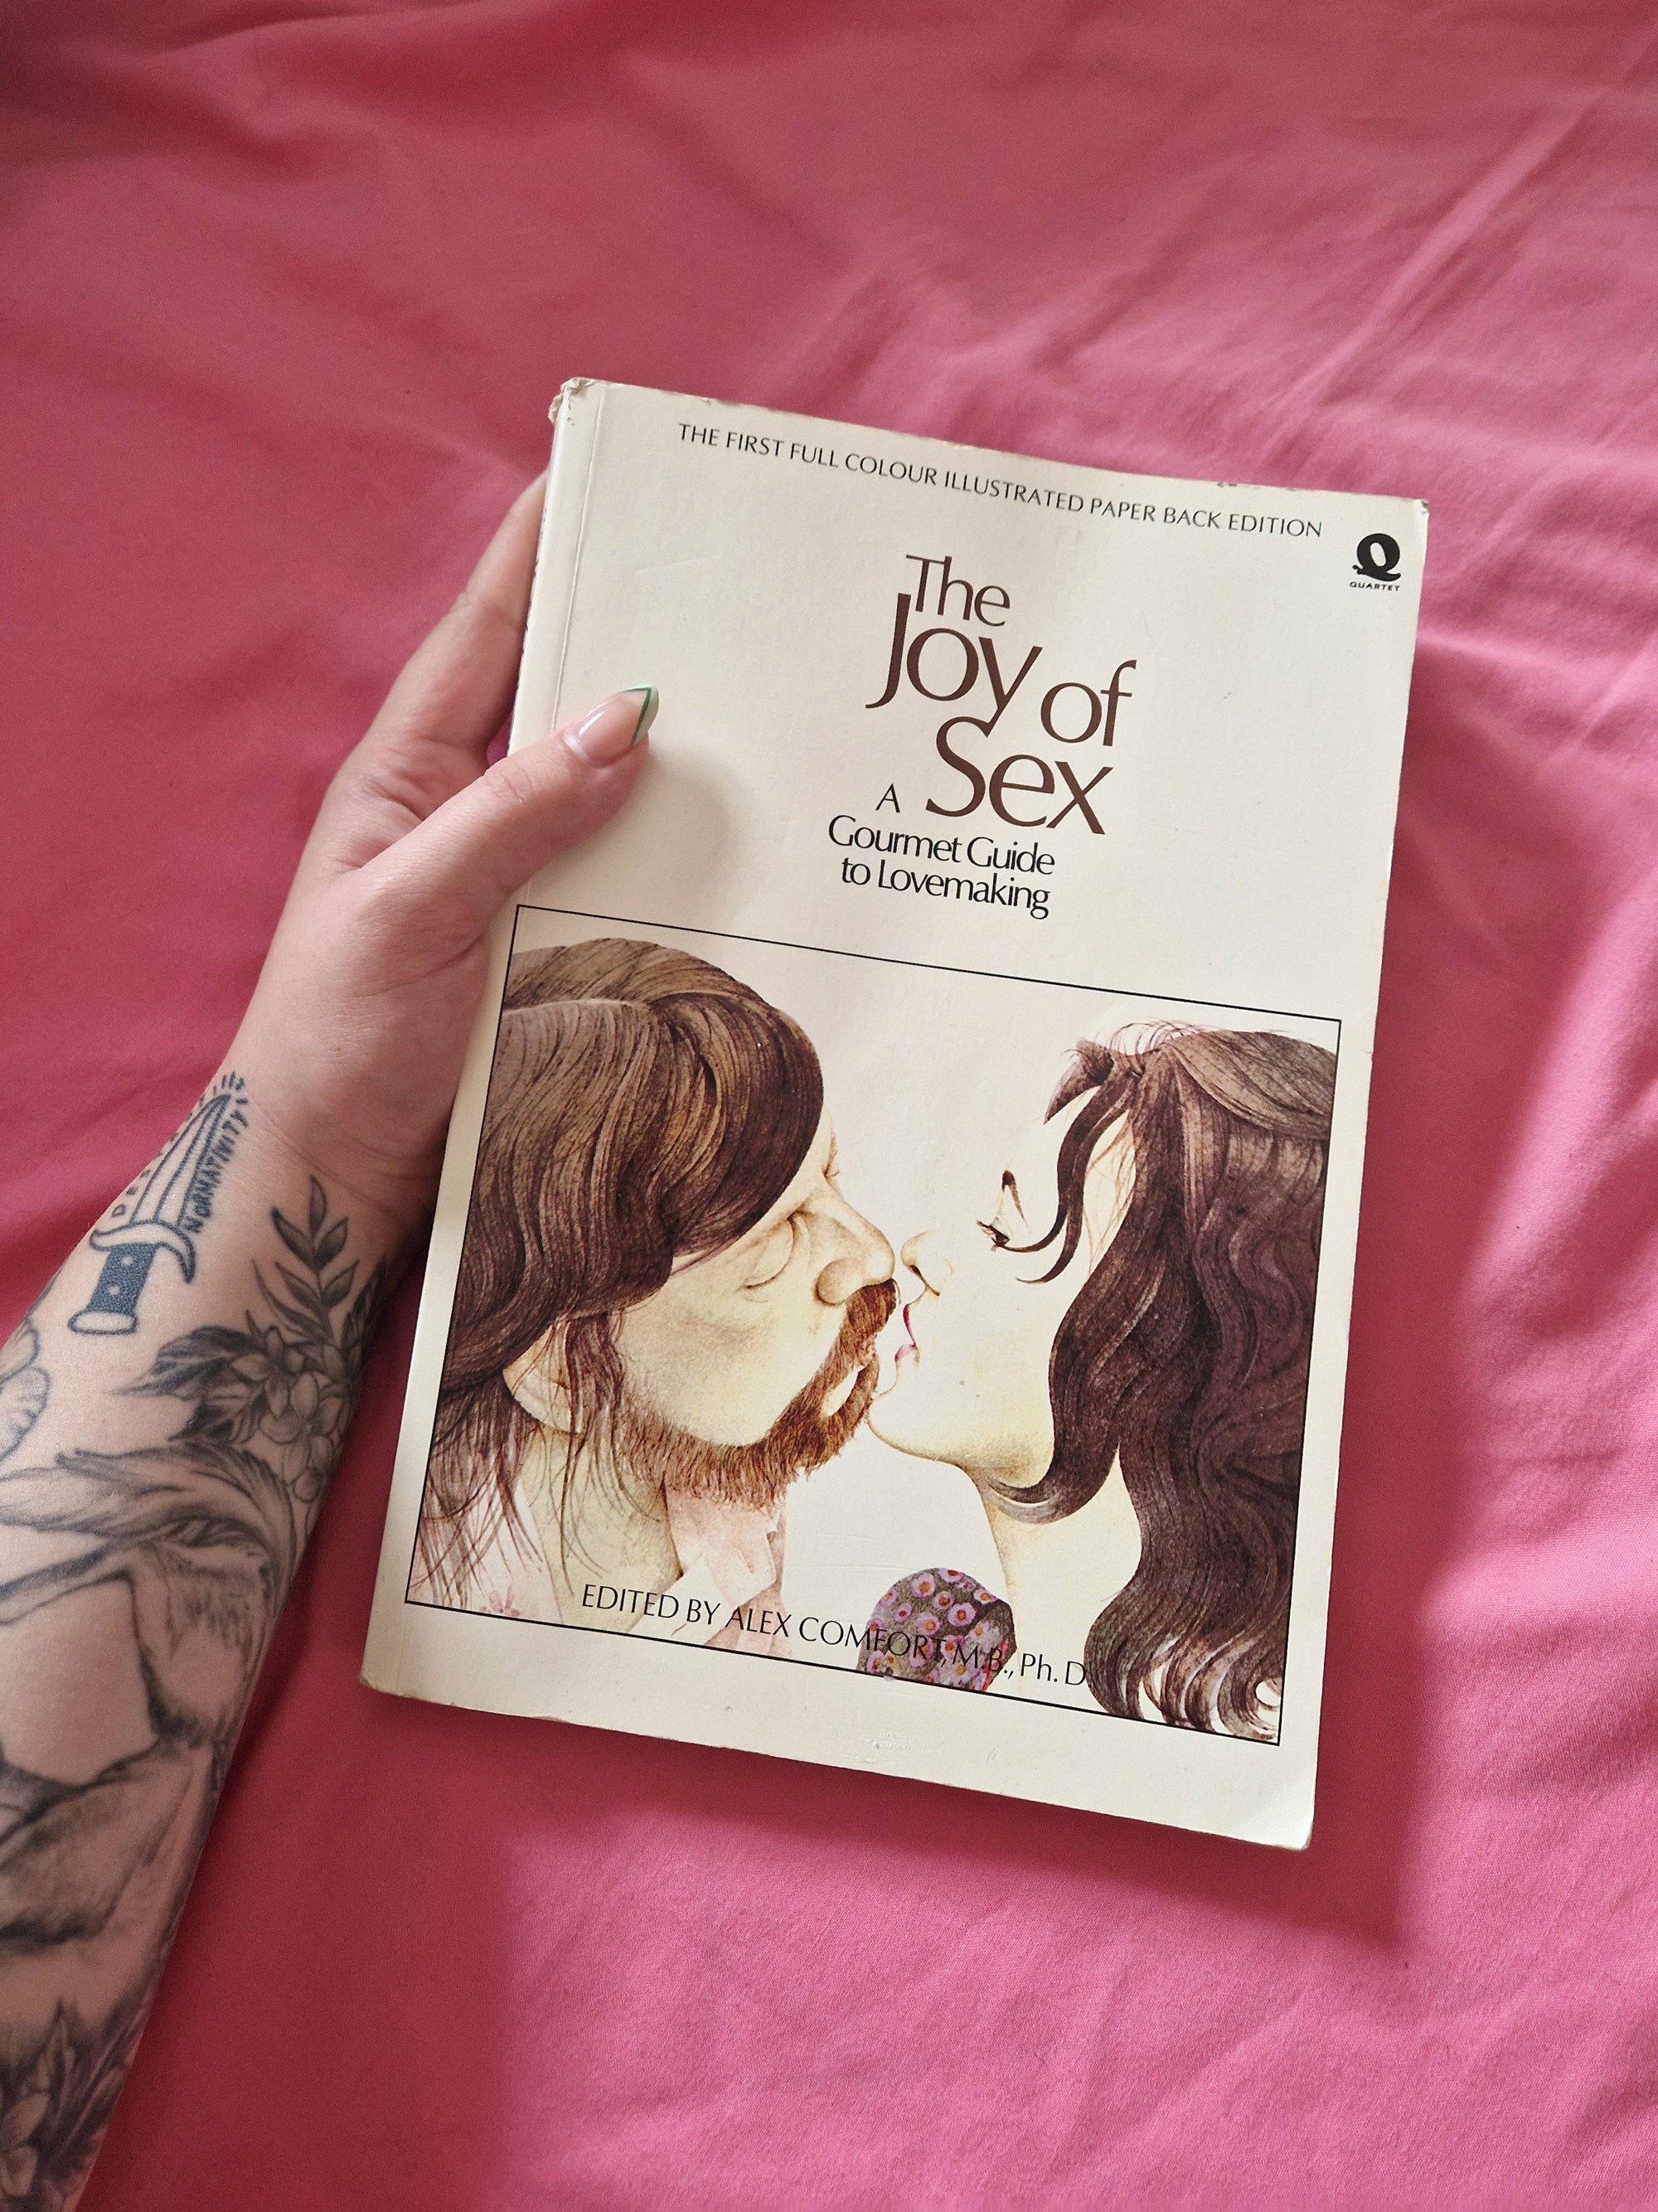 Vintage Fuck Books - Reviewing 'The Joy Of Sex' On Its 50th Anniversary